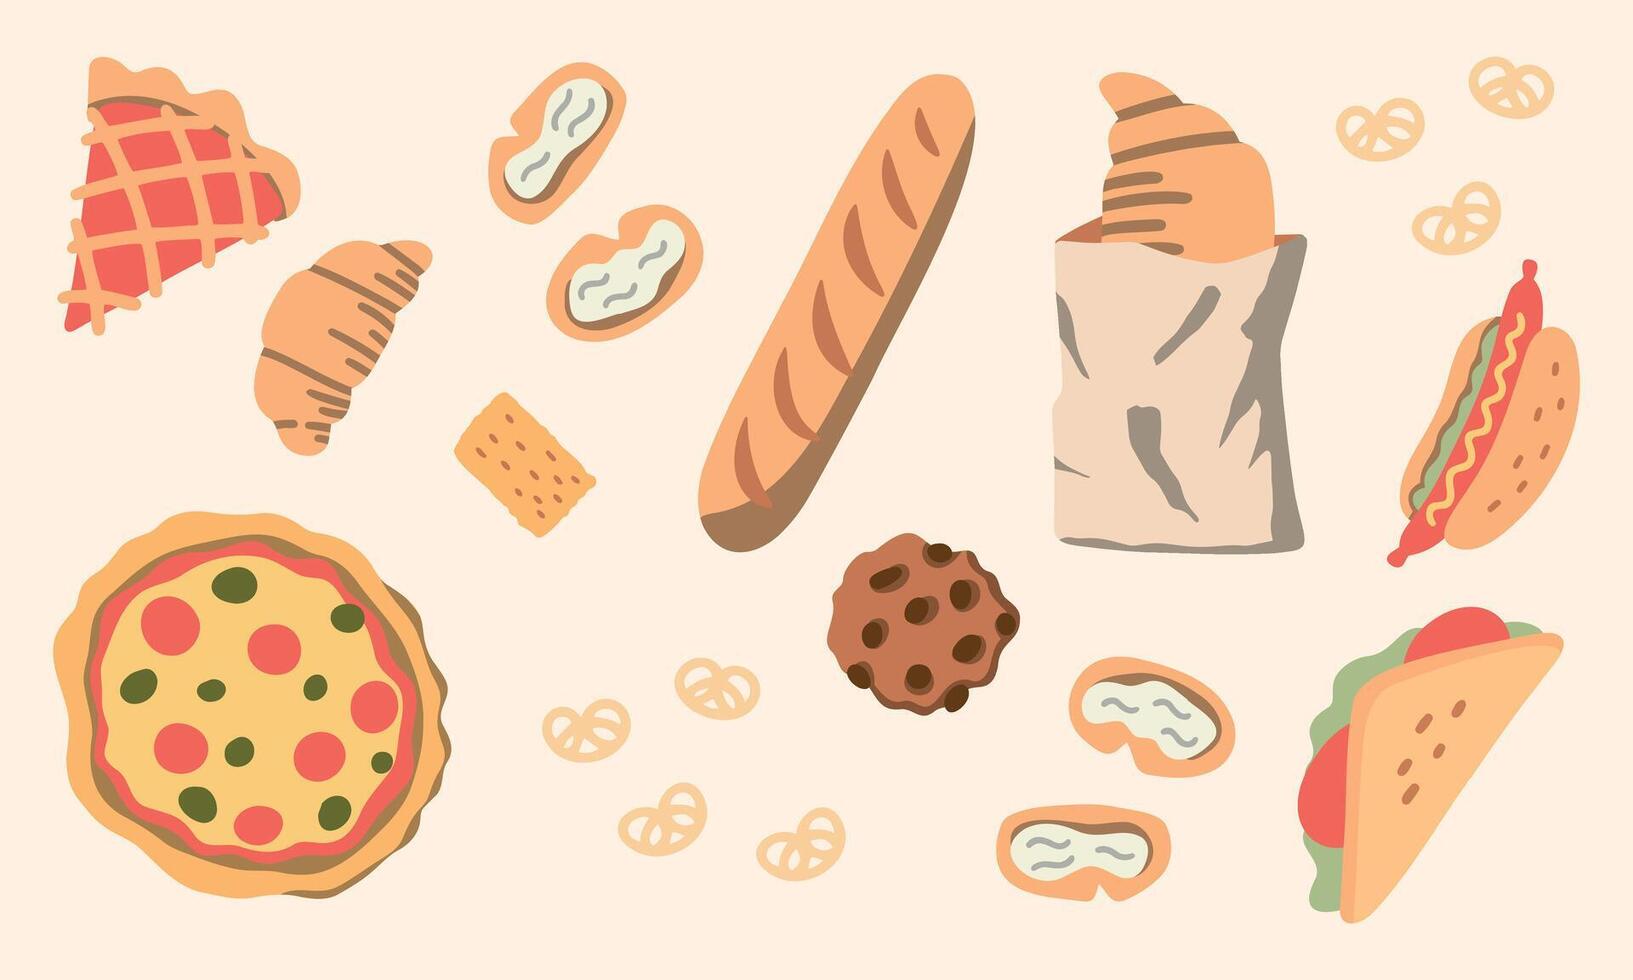 Cartoon bakery products, bread loaf, buns and pastry. Baguette, muffins, pancakes, whole wheat bread, homemade delicious pastries vector set. Hot baked assortment for nutrient snack